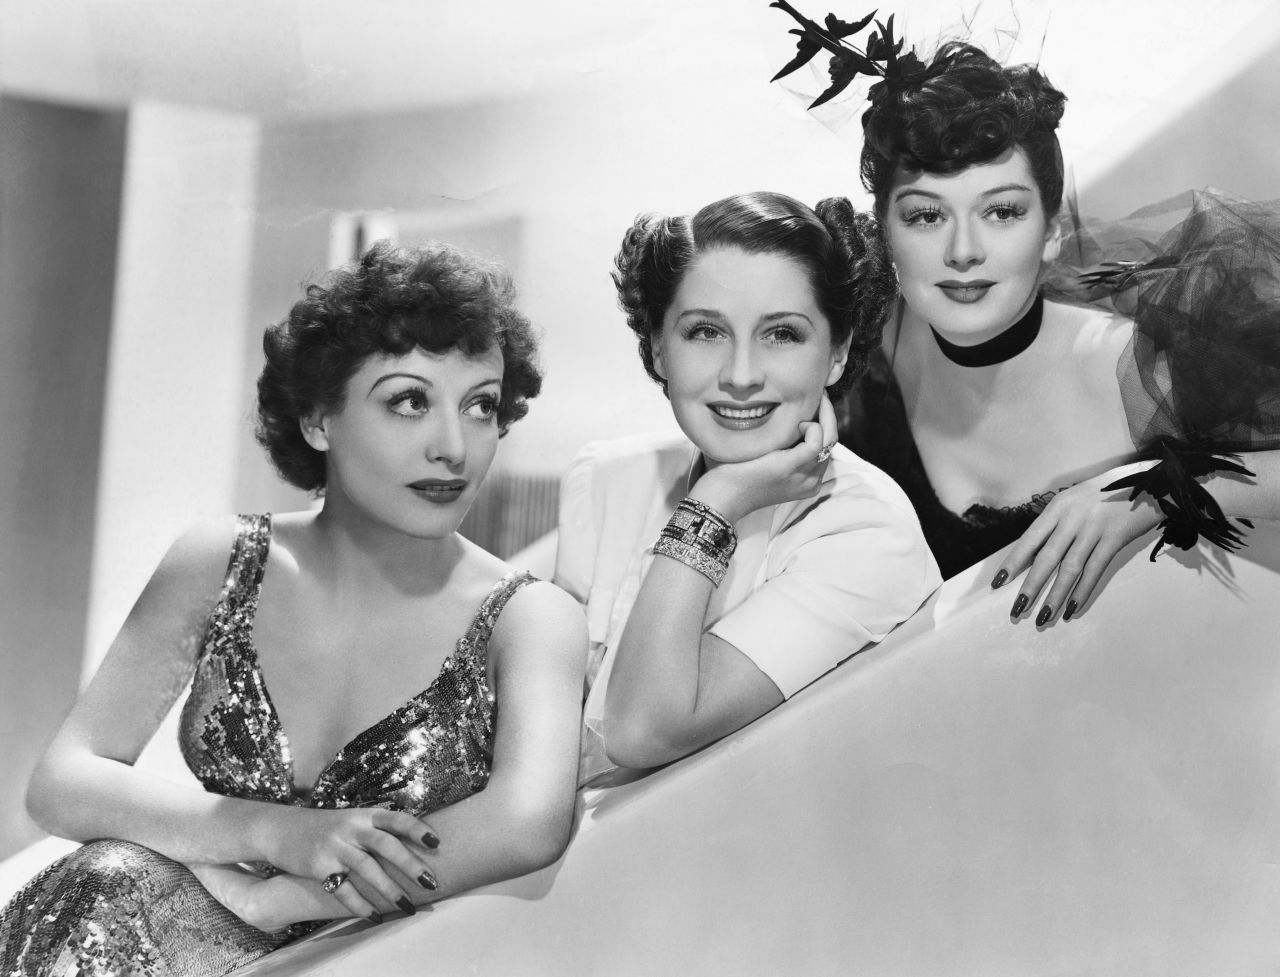 Davis wasn't the first actress who Crawford, left, battled in Hollywood. Her struggles with Norma Shearer, center, the queen of MGM, during the making of "The Women" (1939) were likely warm-ups for "Baby Jane." Crawford resented that Shearer got all the top parts, mainly because her husband, Irving Thalberg, was the studio's production chief. In the George Cukor comedy from Clare Boothe Luce's play, Crawford was a salesgirl out to steal Shearer's husband -- an unsympathetic role that would pave the way for her tougher, grittier performances in the '40s. Rosalind Russell, right, also starred.